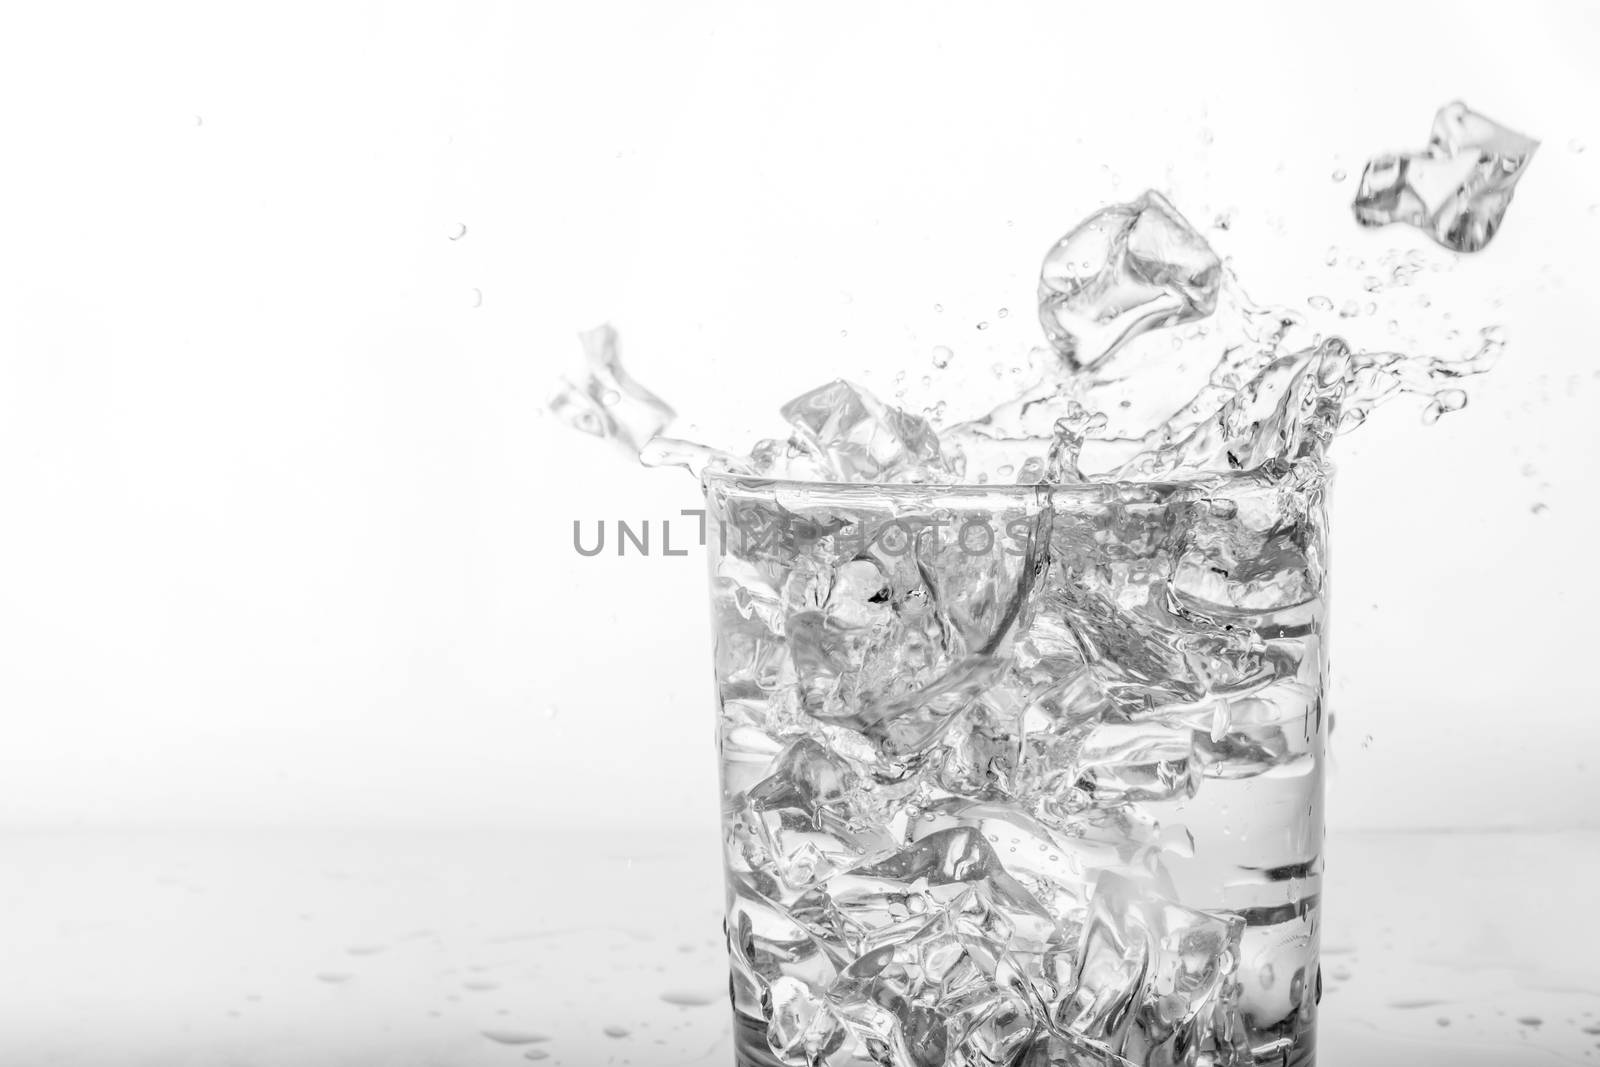 Splashing of water with ice in glass